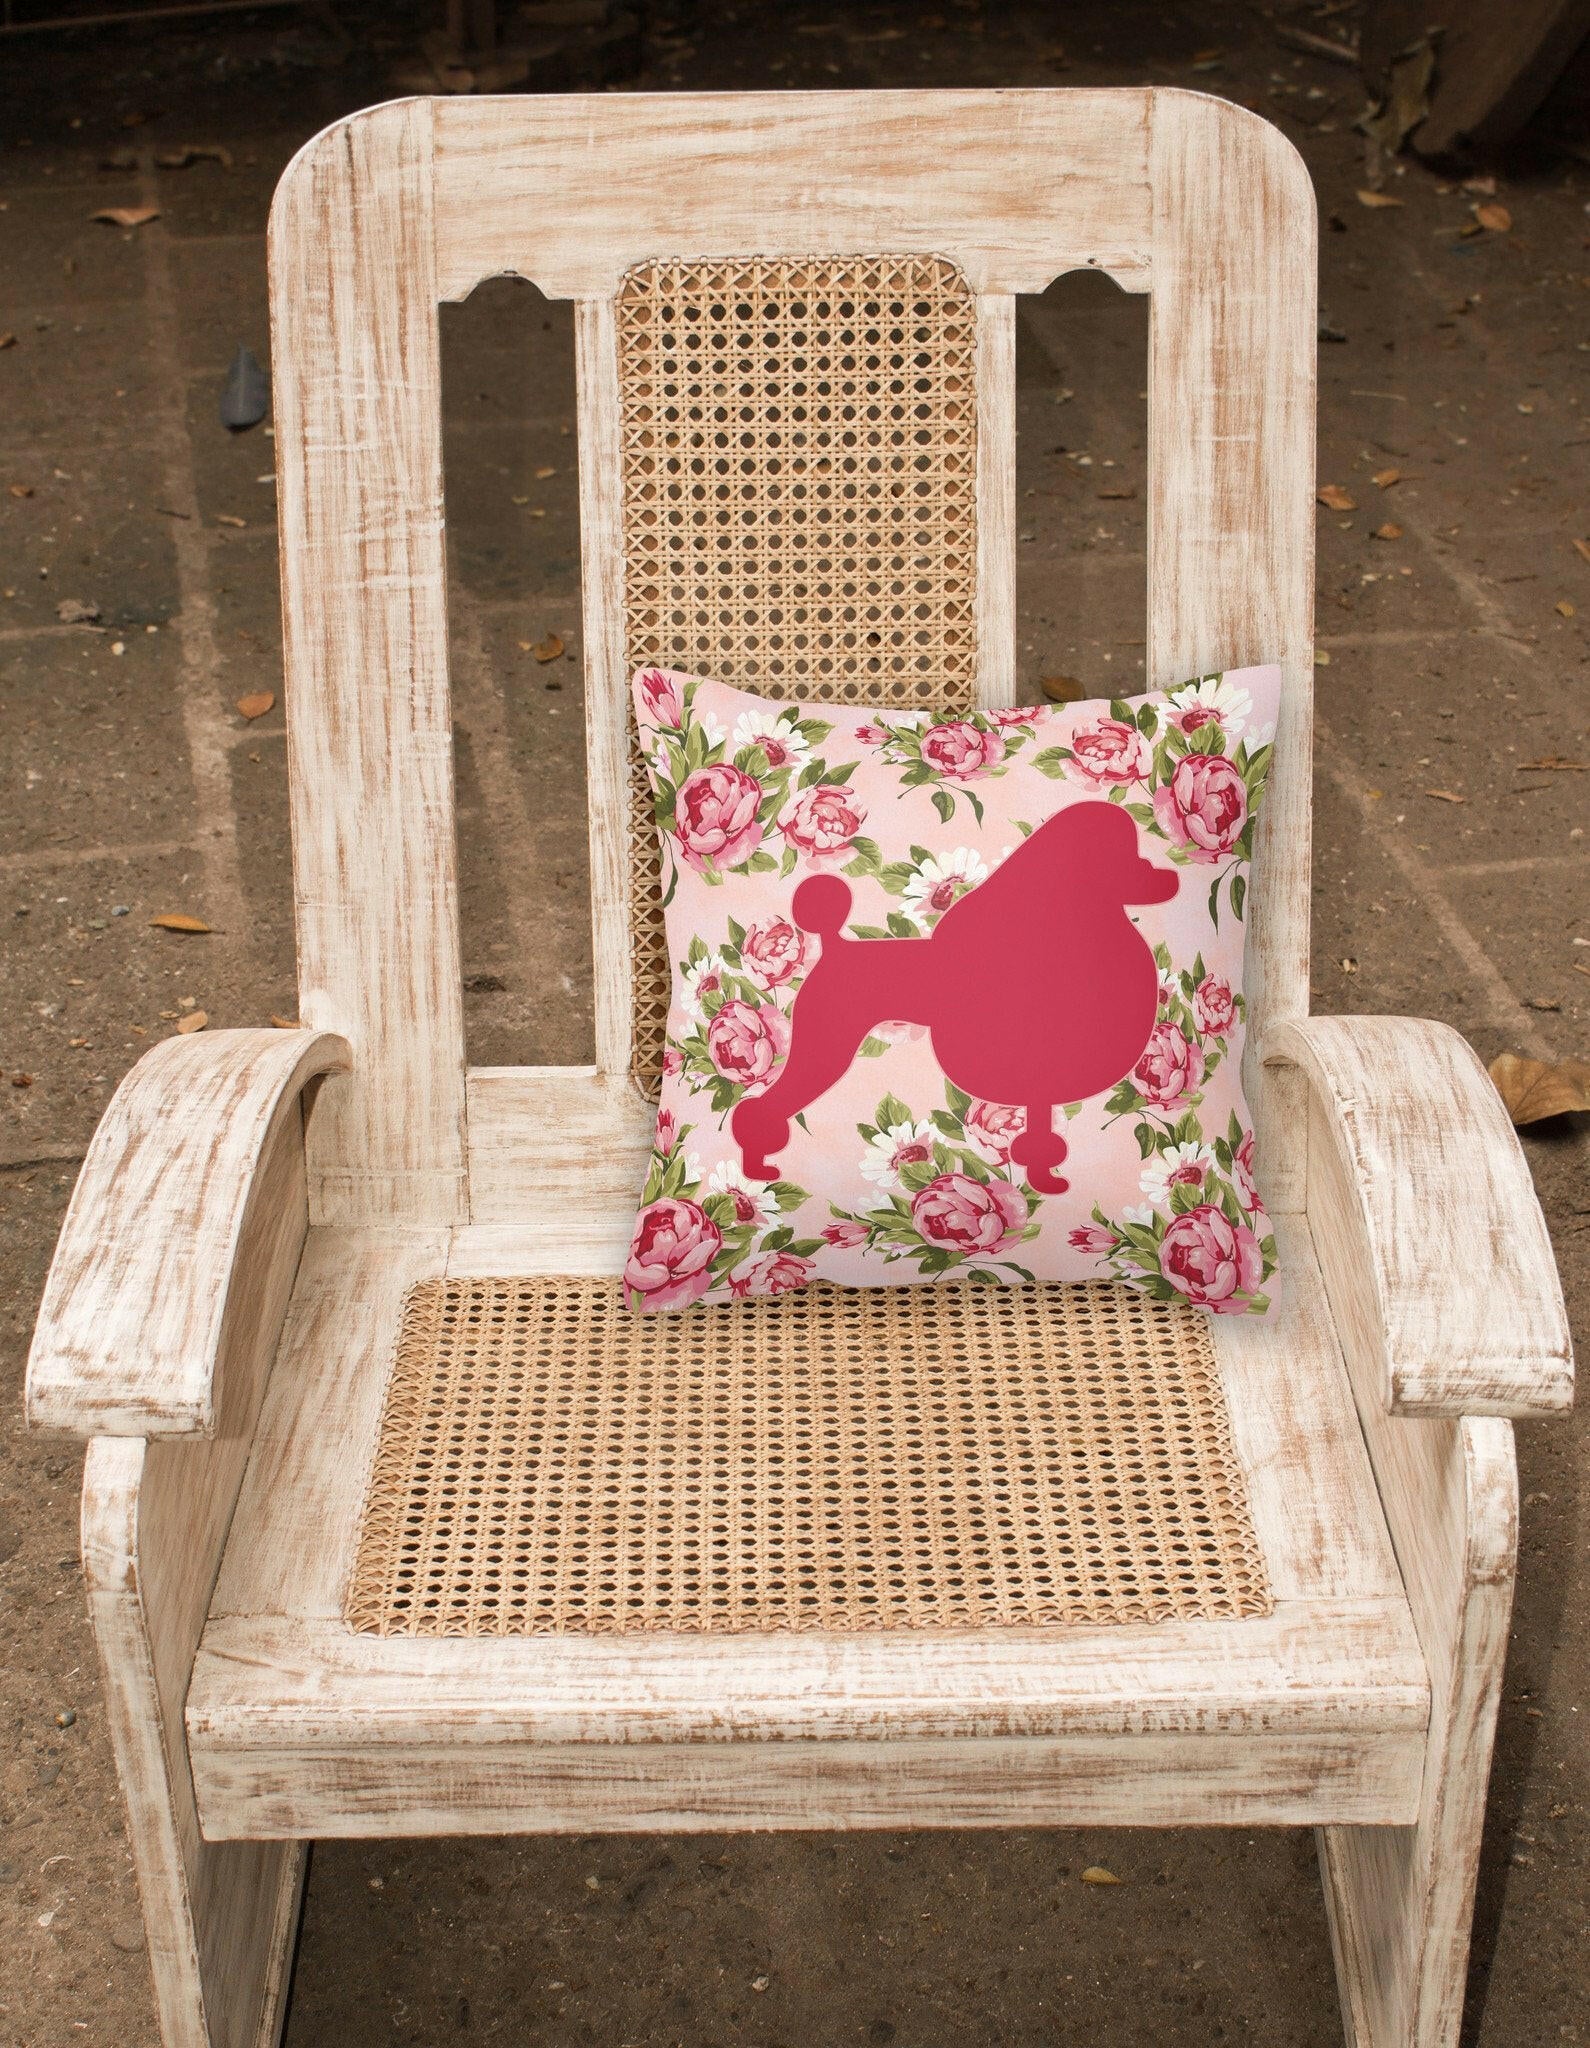 Poodle Shabby Chic Pink Roses  Fabric Decorative Pillow BB1072-RS-PK-PW1414 - the-store.com